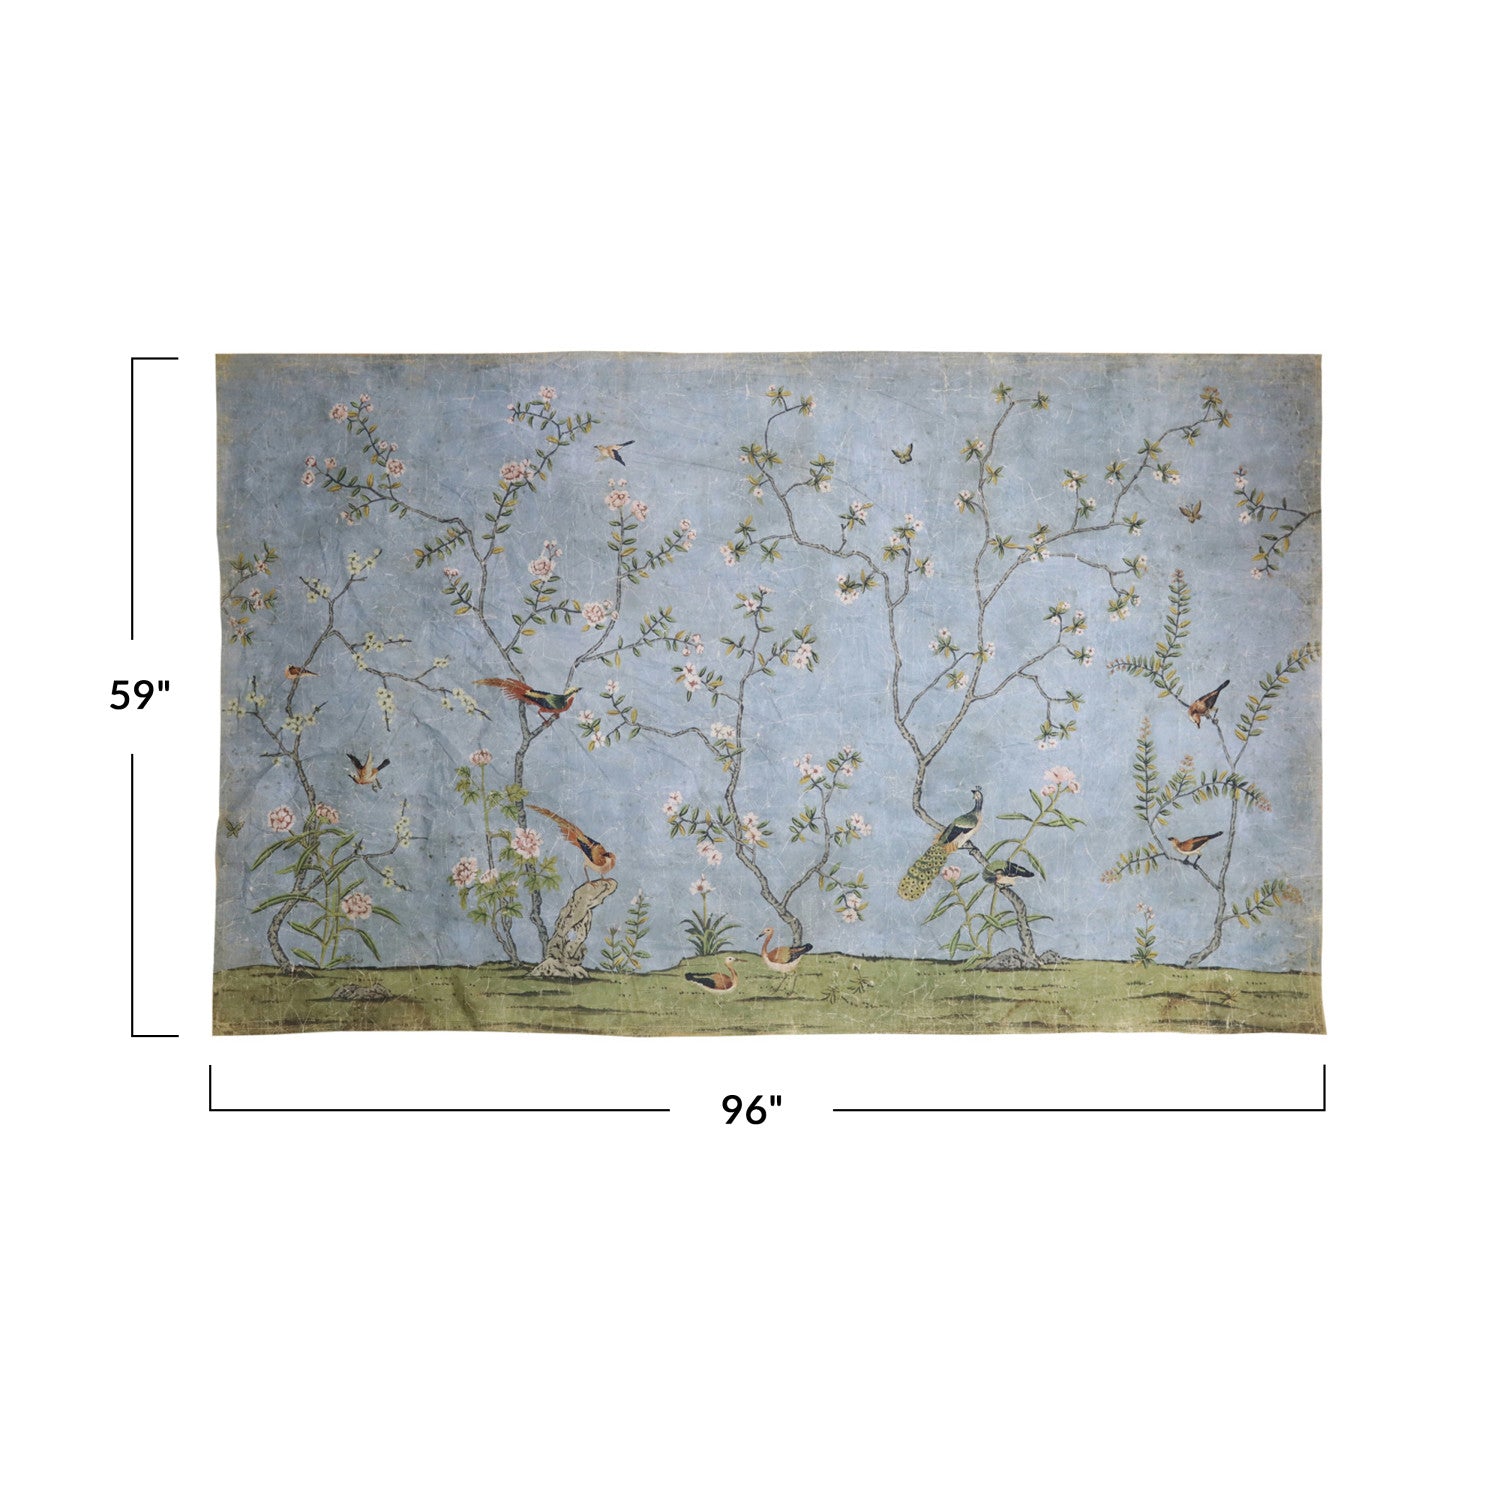 Paper Vintage Reproduction Wall Mural with Trees & Birds measures 96 inches long and 59 inches high. 